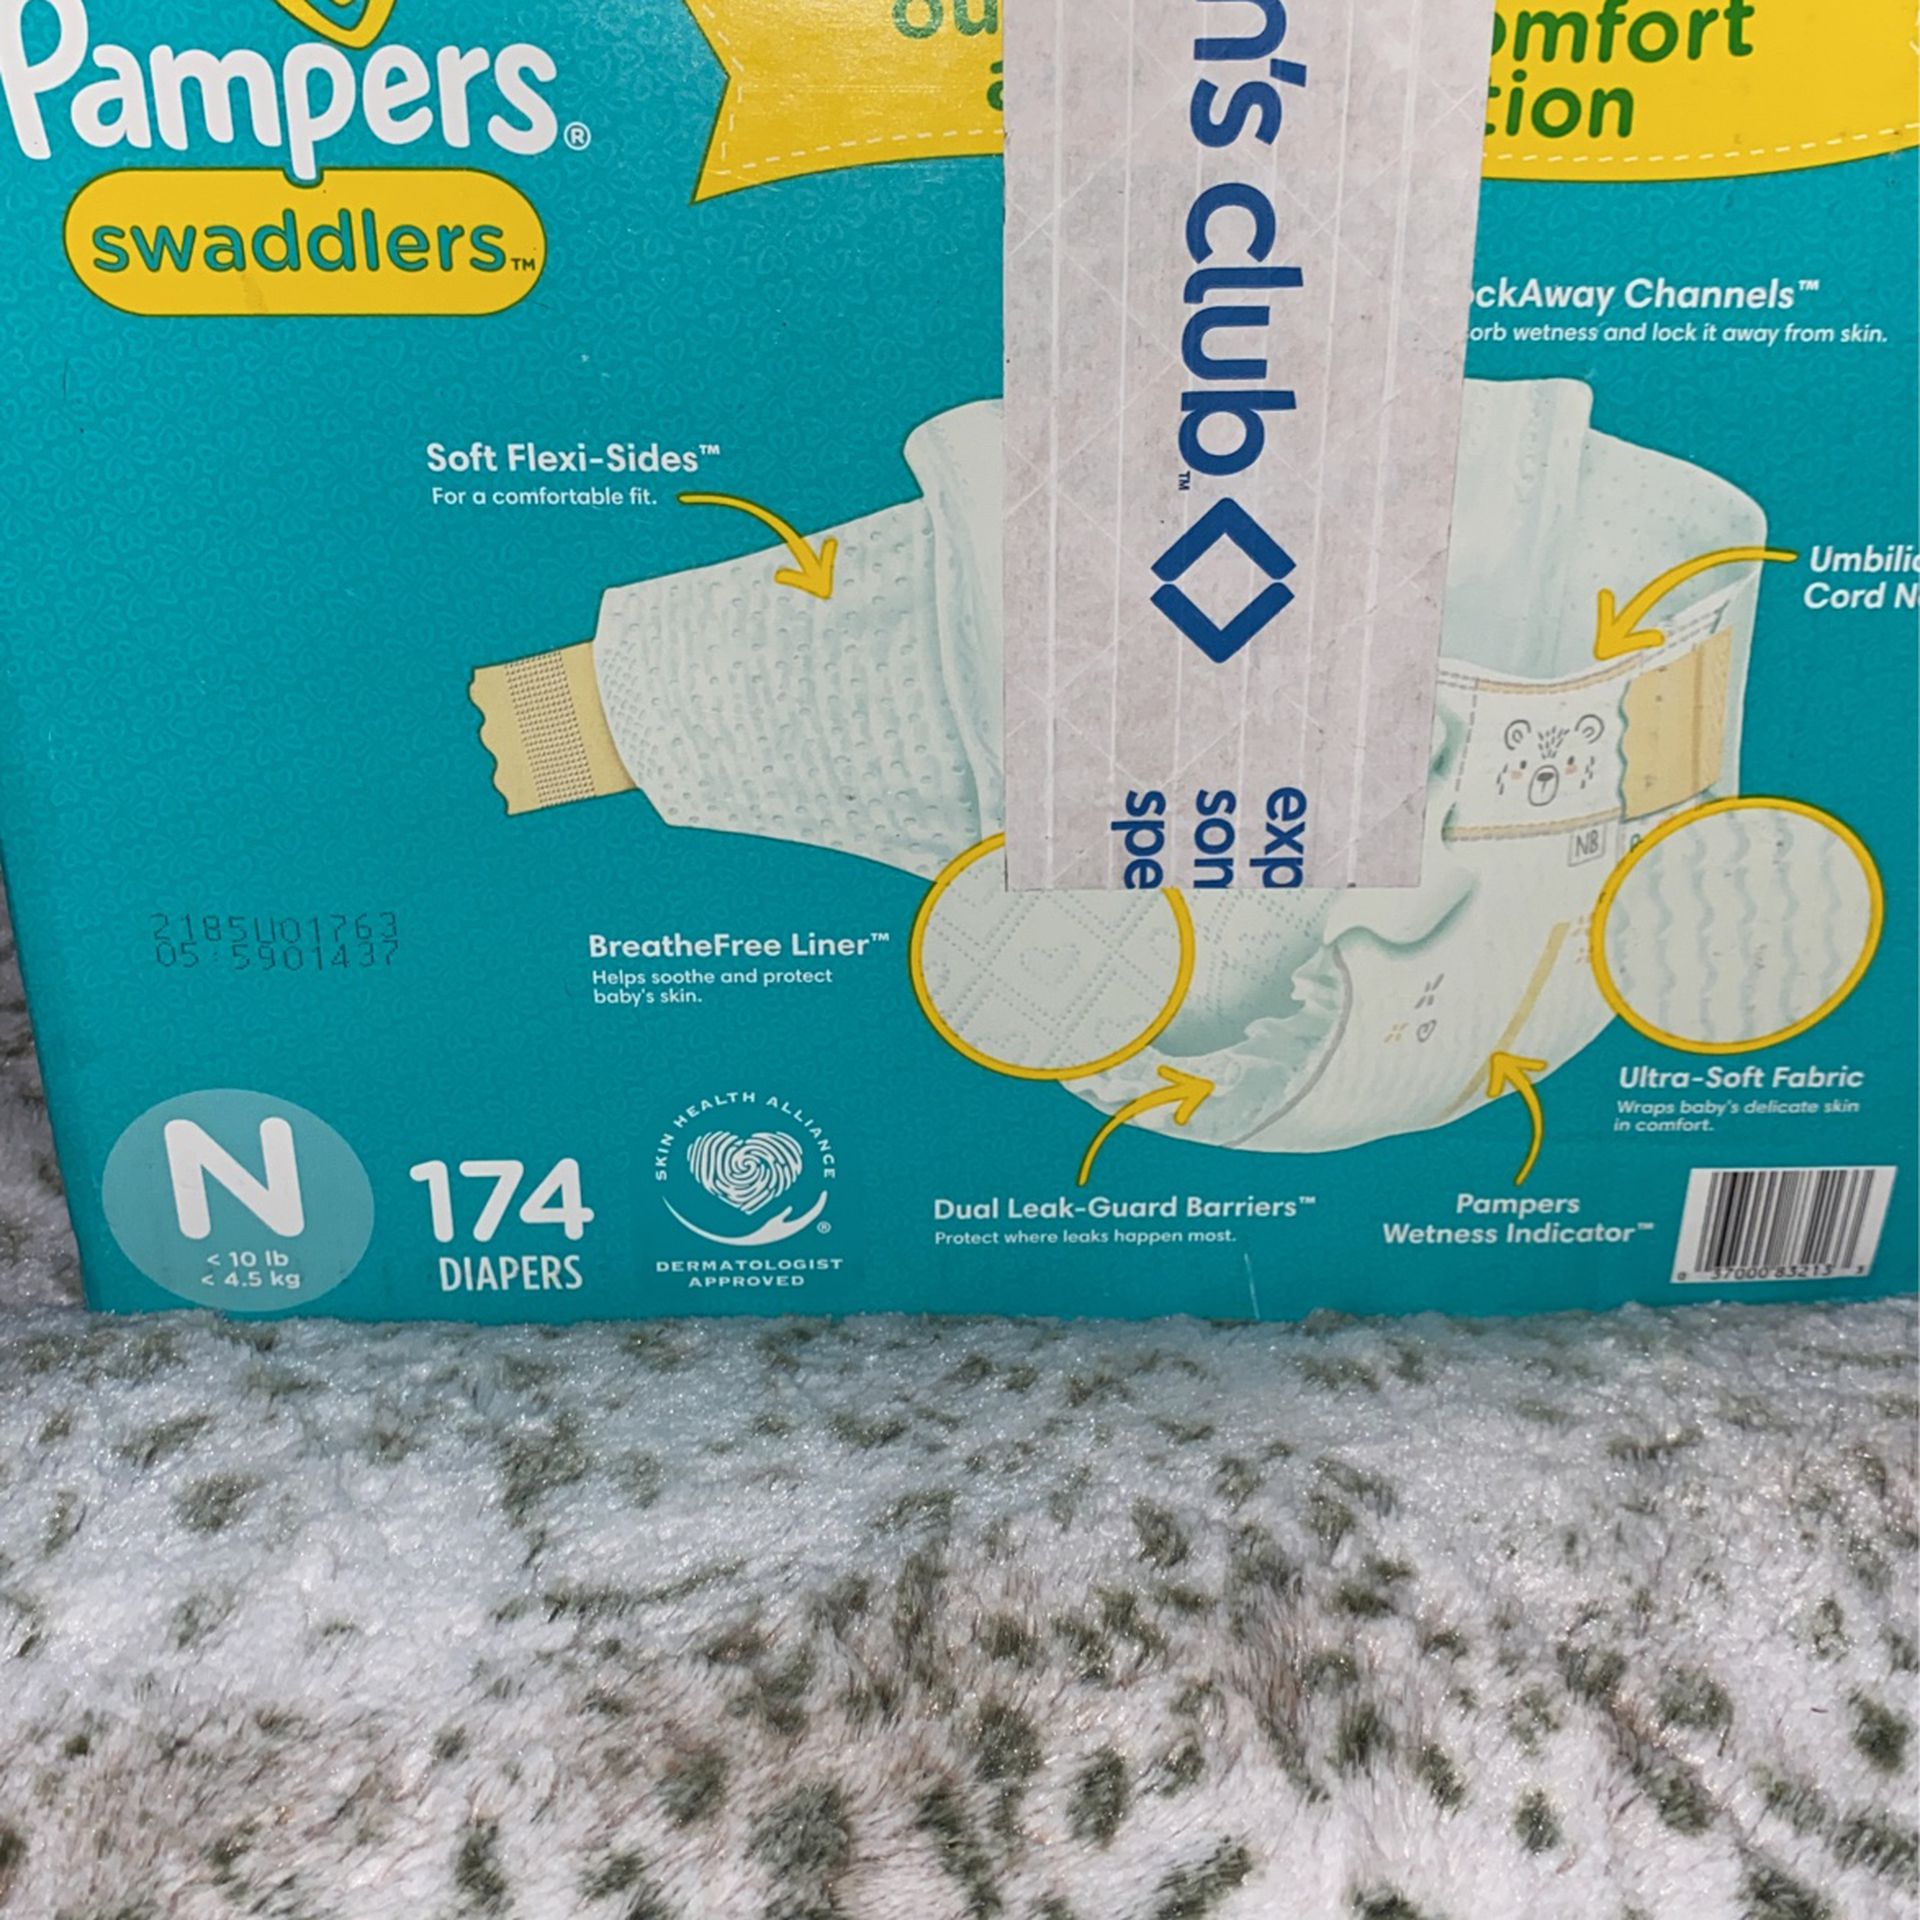 N Pampers Swaddlers 174 Count